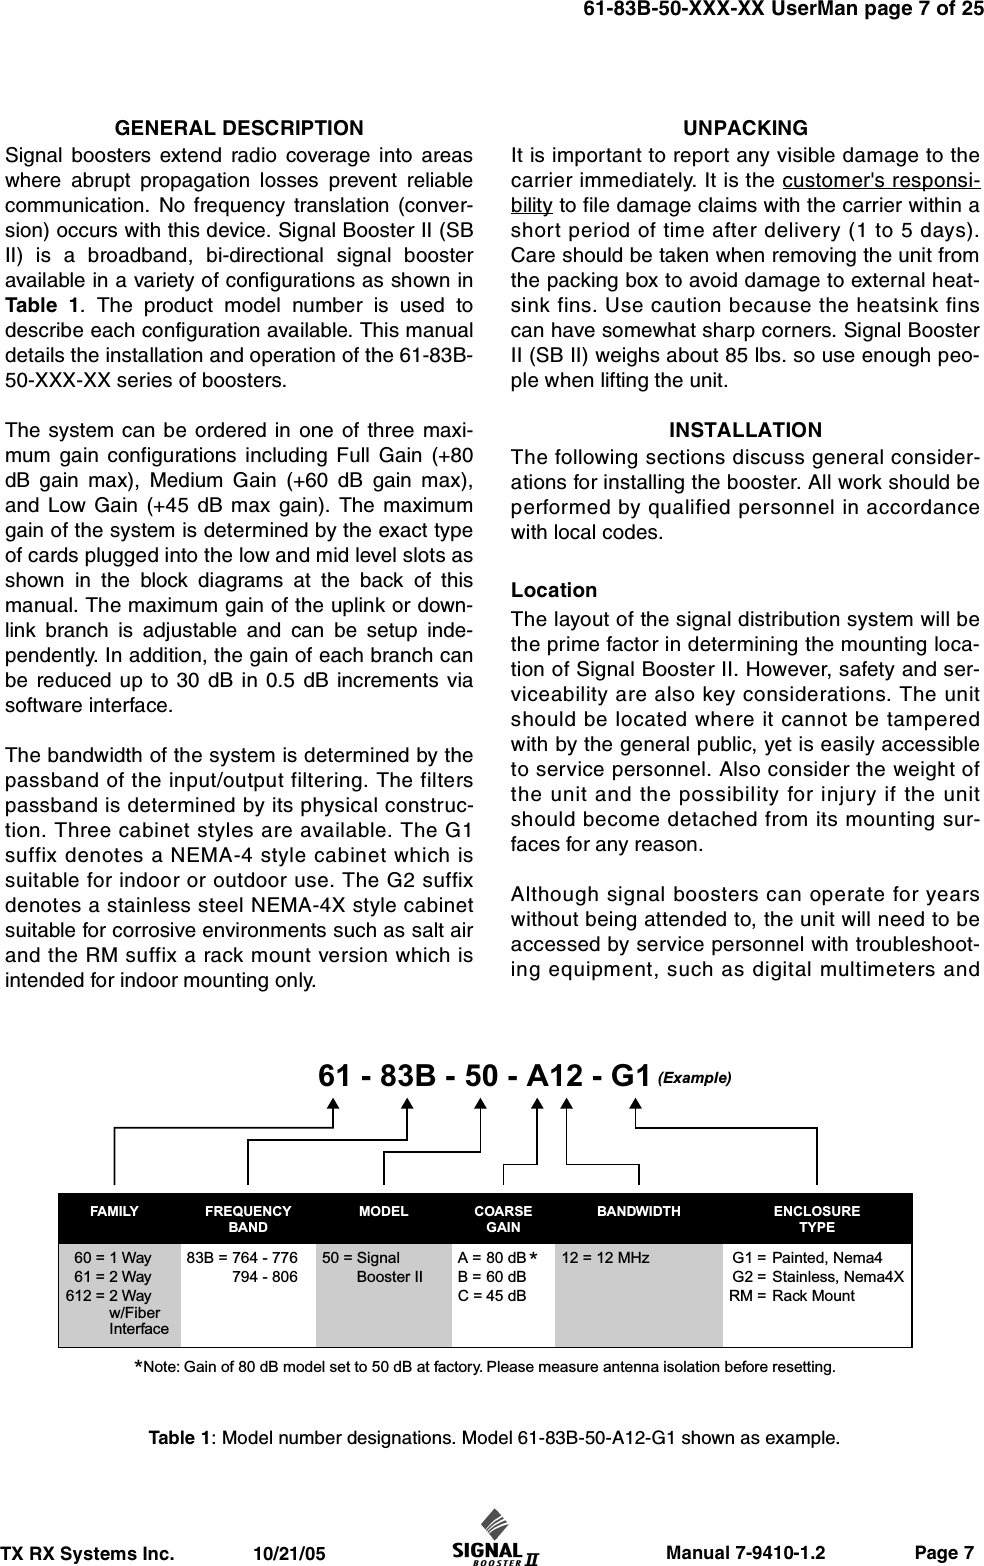                     Manual 7-9410-1.2                 Page 7TX RX Systems Inc.               10/21/0561-83B-50-XXX-XX UserMan page 7 of 25GENERAL DESCRIPTIONSignal boosters extend radio coverage into areaswhere abrupt propagation losses prevent reliablecommunication. No frequency translation (conver-sion) occurs with this device. Signal Booster II (SBII) is a broadband, bi-directional signal boosteravailable in a variety of configurations as shown inTable 1. The product model number is used todescribe each configuration available. This manualdetails the installation and operation of the 61-83B-50-XXX-XX series of boosters.The system can be ordered in one of three maxi-mum gain configurations including Full Gain (+80dB gain max), Medium Gain (+60 dB gain max),and Low Gain (+45 dB max gain). The maximumgain of the system is determined by the exact typeof cards plugged into the low and mid level slots asshown in the block diagrams at the back of thismanual. The maximum gain of the uplink or down-link branch is adjustable and can be setup inde-pendently. In addition, the gain of each branch canbe reduced up to 30 dB in 0.5 dB increments viasoftware interface.The bandwidth of the system is determined by thepassband of the input/output filtering. The filterspassband is determined by its physical construc-tion. Three cabinet styles are available. The G1suffix denotes a NEMA-4 style cabinet which issuitable for indoor or outdoor use. The G2 suffixdenotes a stainless steel NEMA-4X style cabinetsuitable for corrosive environments such as salt airand the RM suffix a rack mount version which isintended for indoor mounting only.UNPACKINGIt is important to report any visible damage to thecarrier immediately. It is the customer&apos;s responsi-bility to file damage claims with the carrier within ashort period of time after delivery (1 to 5 days).Care should be taken when removing the unit fromthe packing box to avoid damage to external heat-sink fins. Use caution because the heatsink finscan have somewhat sharp corners. Signal BoosterII (SB II) weighs about 85 lbs. so use enough peo-ple when lifting the unit.INSTALLATIONThe following sections discuss general consider-ations for installing the booster. All work should beperformed by qualified personnel in accordancewith local codes.LocationThe layout of the signal distribution system will bethe prime factor in determining the mounting loca-tion of Signal Booster II. However, safety and ser-viceability are also key considerations. The unitshould be located where it cannot be tamperedwith by the general public, yet is easily accessibleto service personnel. Also consider the weight ofthe unit and the possibility for injury if the unitshould become detached from its mounting sur-faces for any reason.Although signal boosters can operate for yearswithout being attended to, the unit will need to beaccessed by service personnel with troubleshoot-ing equipment, such as digital multimeters and61 - 83B - 50 - A12 - G1(Example)*FAMILY FREQUENCYBANDMODEL COARSEGAINBANDWIDTH ENCLOSURETYPE60 =61 =612 =1 Way2 Way2 Wayw/FiberInterface83B = 764 - 776794 - 80650 = SignalBooster IIA =B =C =80 dB60 dB45 dB12 = 12 MHz G1 =G2 =RM =Painted, Nema4Stainless, Nema4XRack Mount*Note: Gain of 80 dB model set to 50 dB at factory. Please measure antenna isolation before resetting.Table 1: Model number designations. Model 61-83B-50-A12-G1 shown as example.GAI